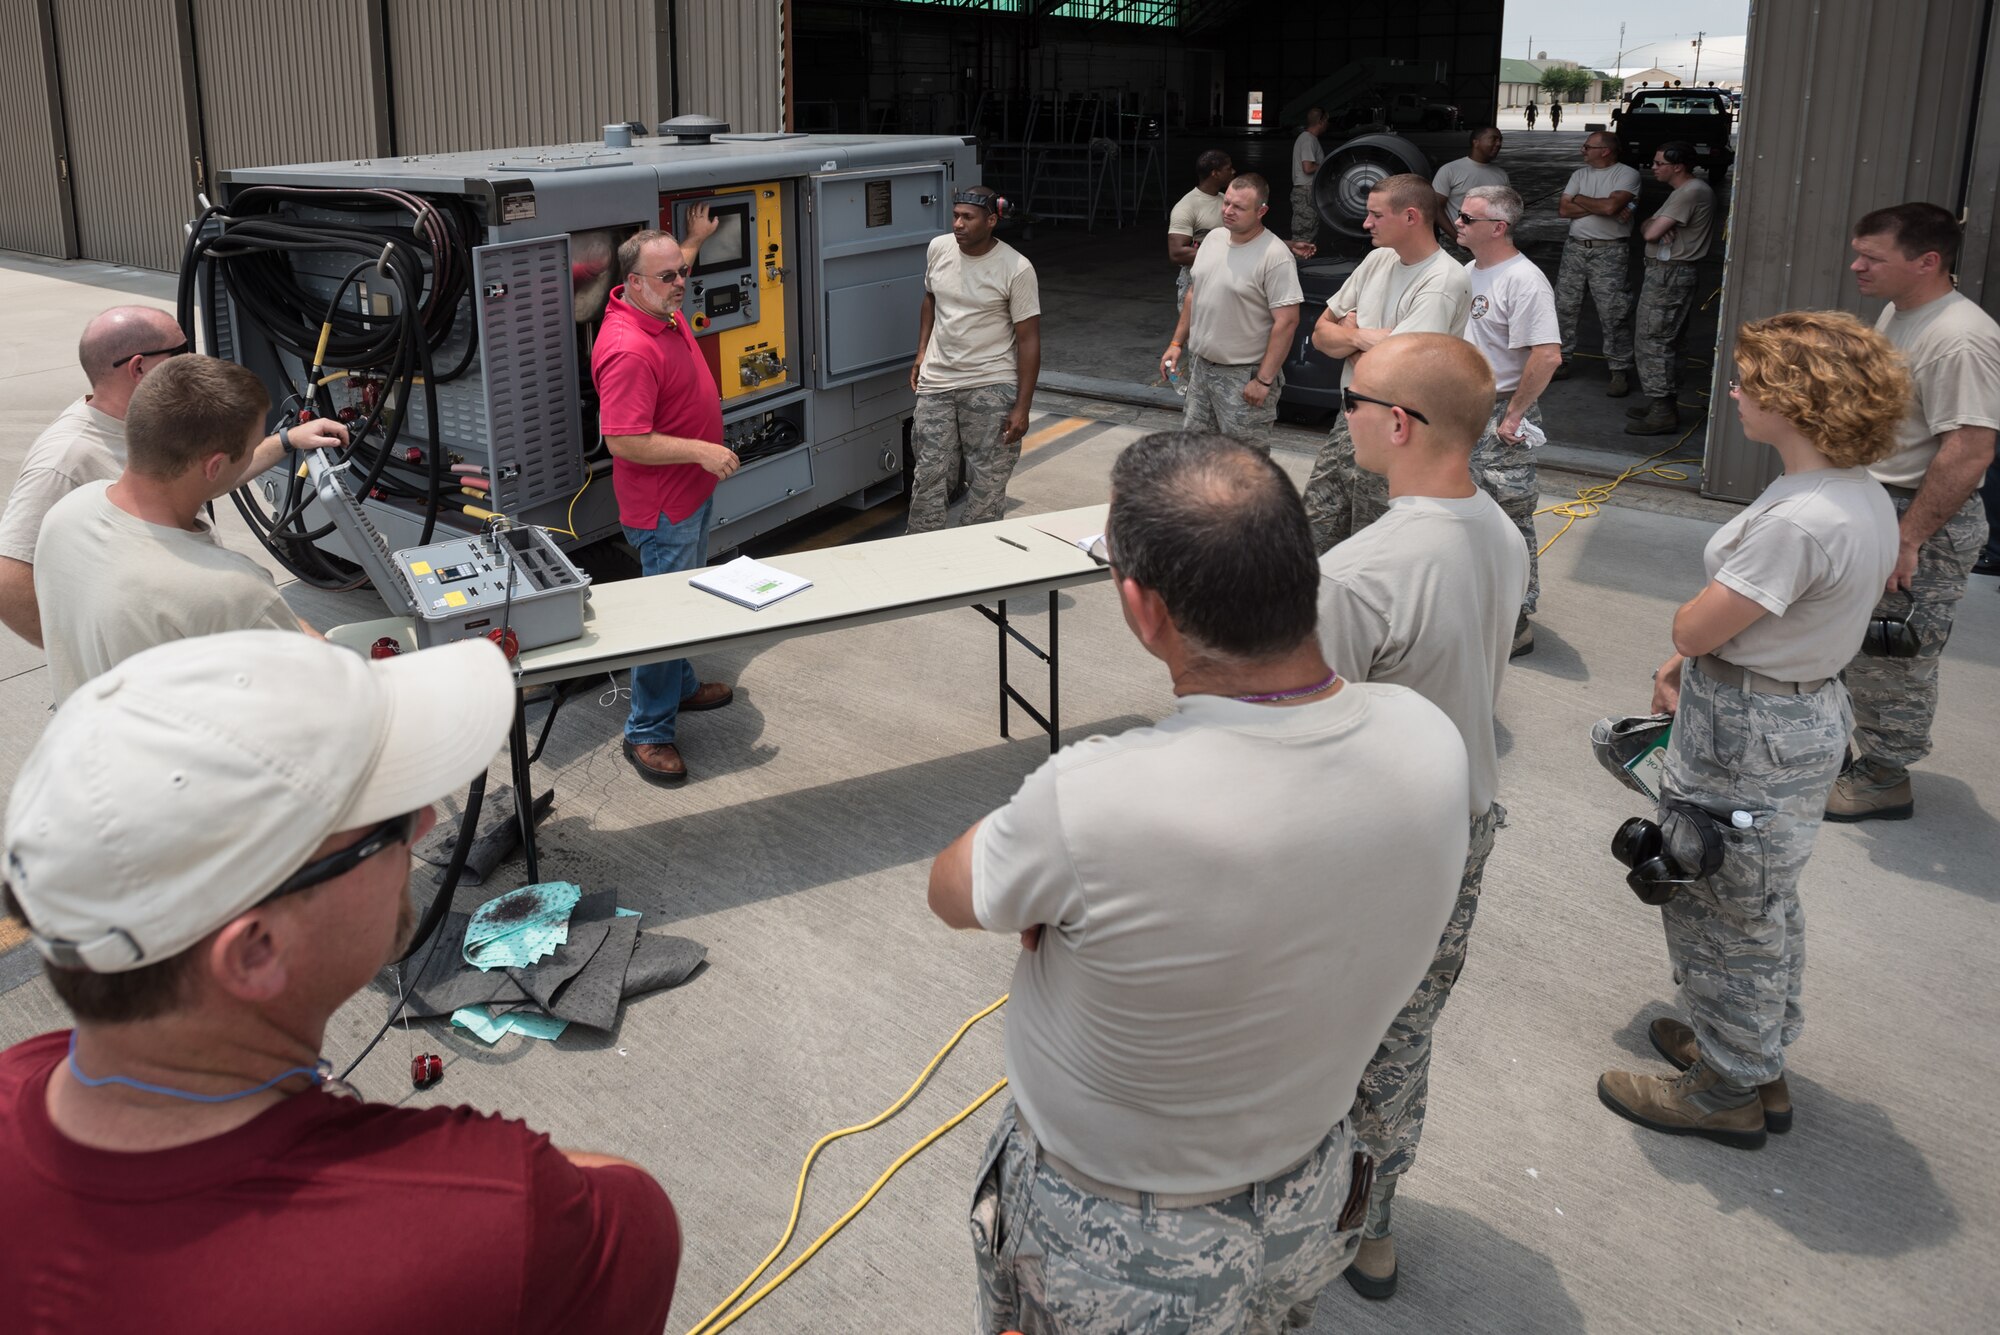 Airmen from the Connecticut, Montana, Missouri and Kentucky Air National Guard attend a training class on hydraulic testing at the Air National Guard’s Air Dominance Center in Savannah, Ga., June 14, 2016. The class is part of Maintenance University here, a weeklong course designed to provide intensive instruction in aircraft maintenance. Now in its eighth year, Maintenance University is sponsored by the 123rd Airlift Wing. (U.S. Air National Guard photo by Lt. Col. Dale Greer)